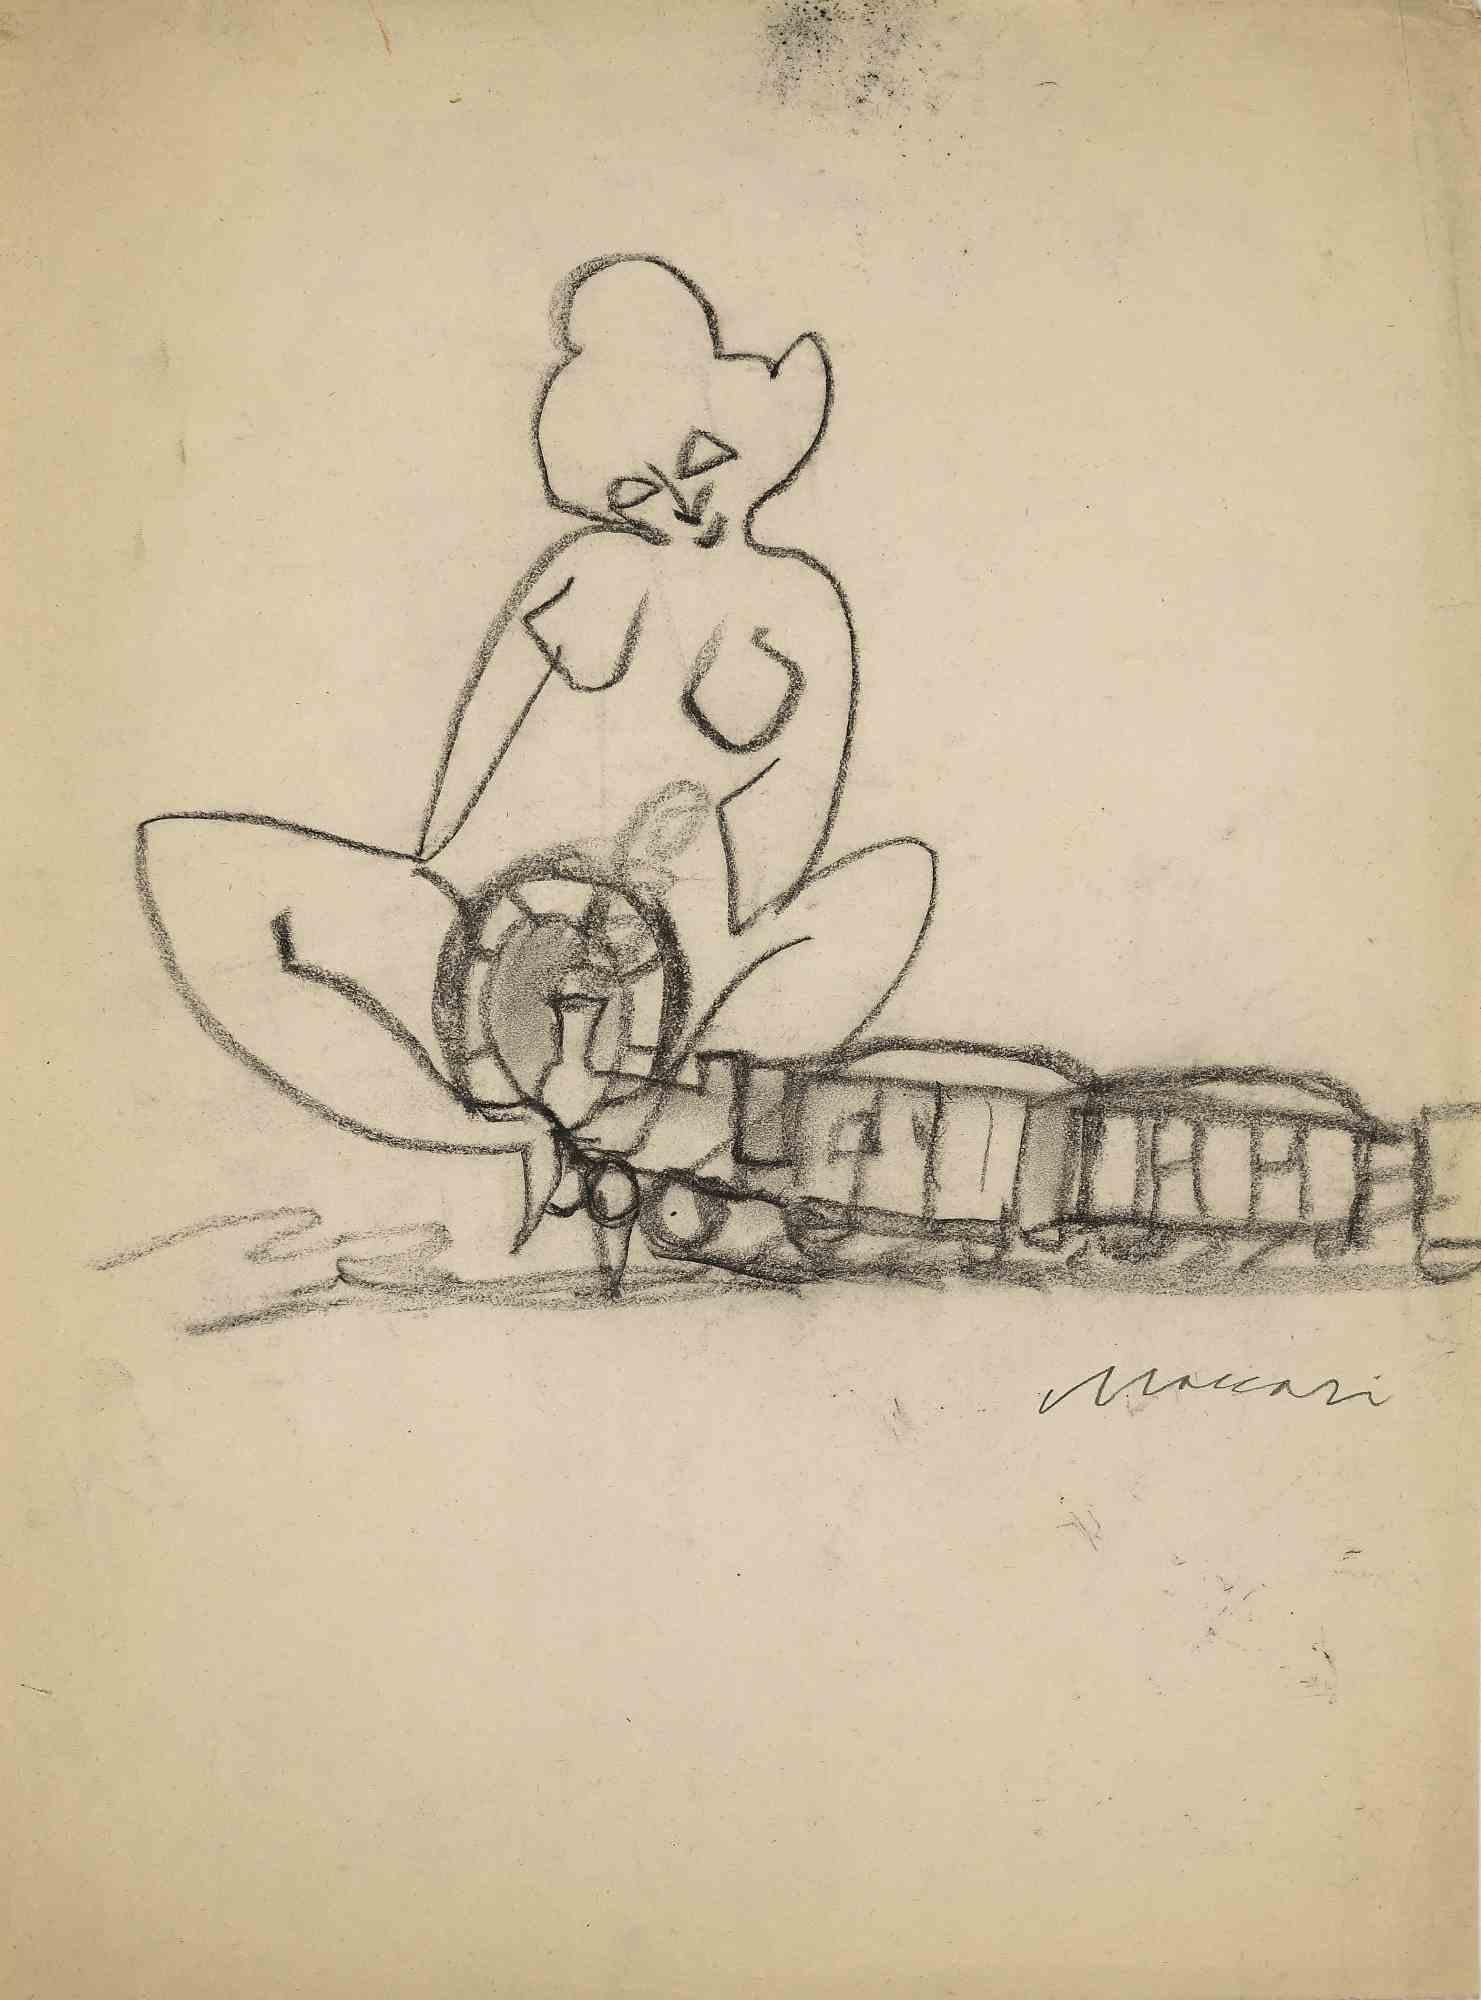 Nude On The Train is a charcoal Drawing on creamy colored paper realized in 1960 by Mino Maccari in the mid-20th century.

Hand-signed on the lower in pencil.

Good condition on yellowed paper with with some folding and foxing.

The artwork is